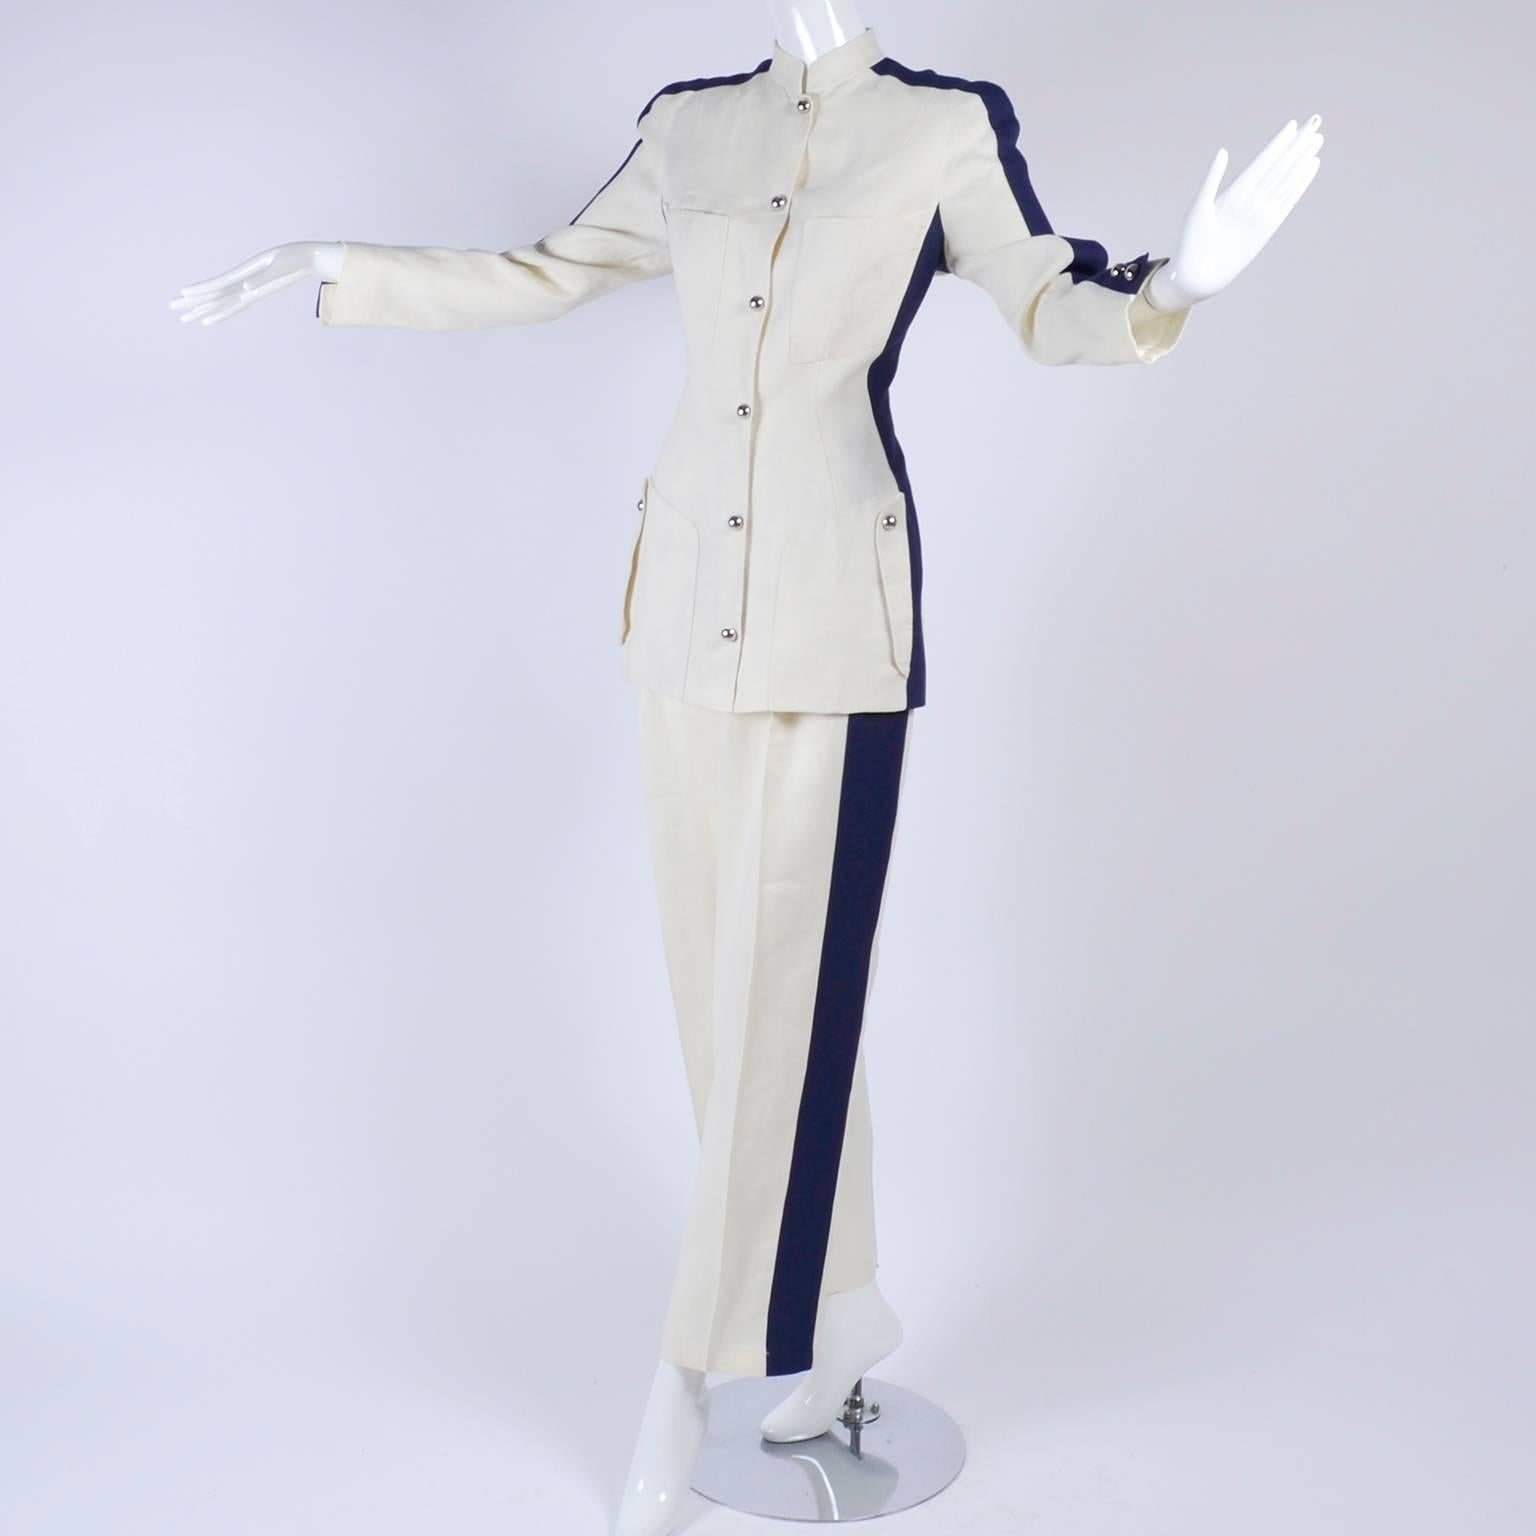 Gray Thierry Mugler Vintage Pants Suit W Side Stripes Jacket & High Waist Trousers